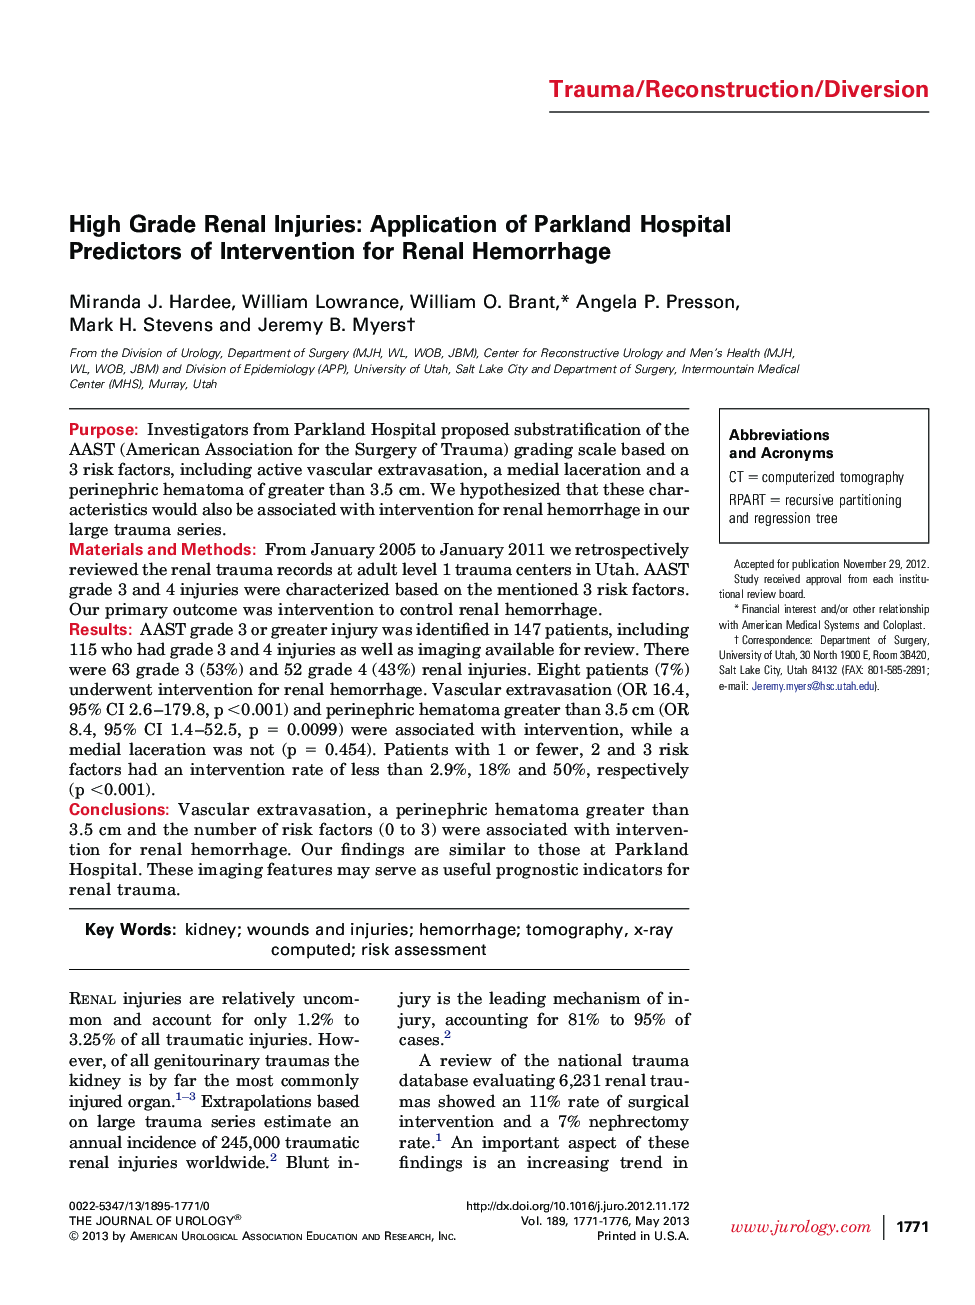 High Grade Renal Injuries: Application of Parkland Hospital Predictors of Intervention for Renal Hemorrhage